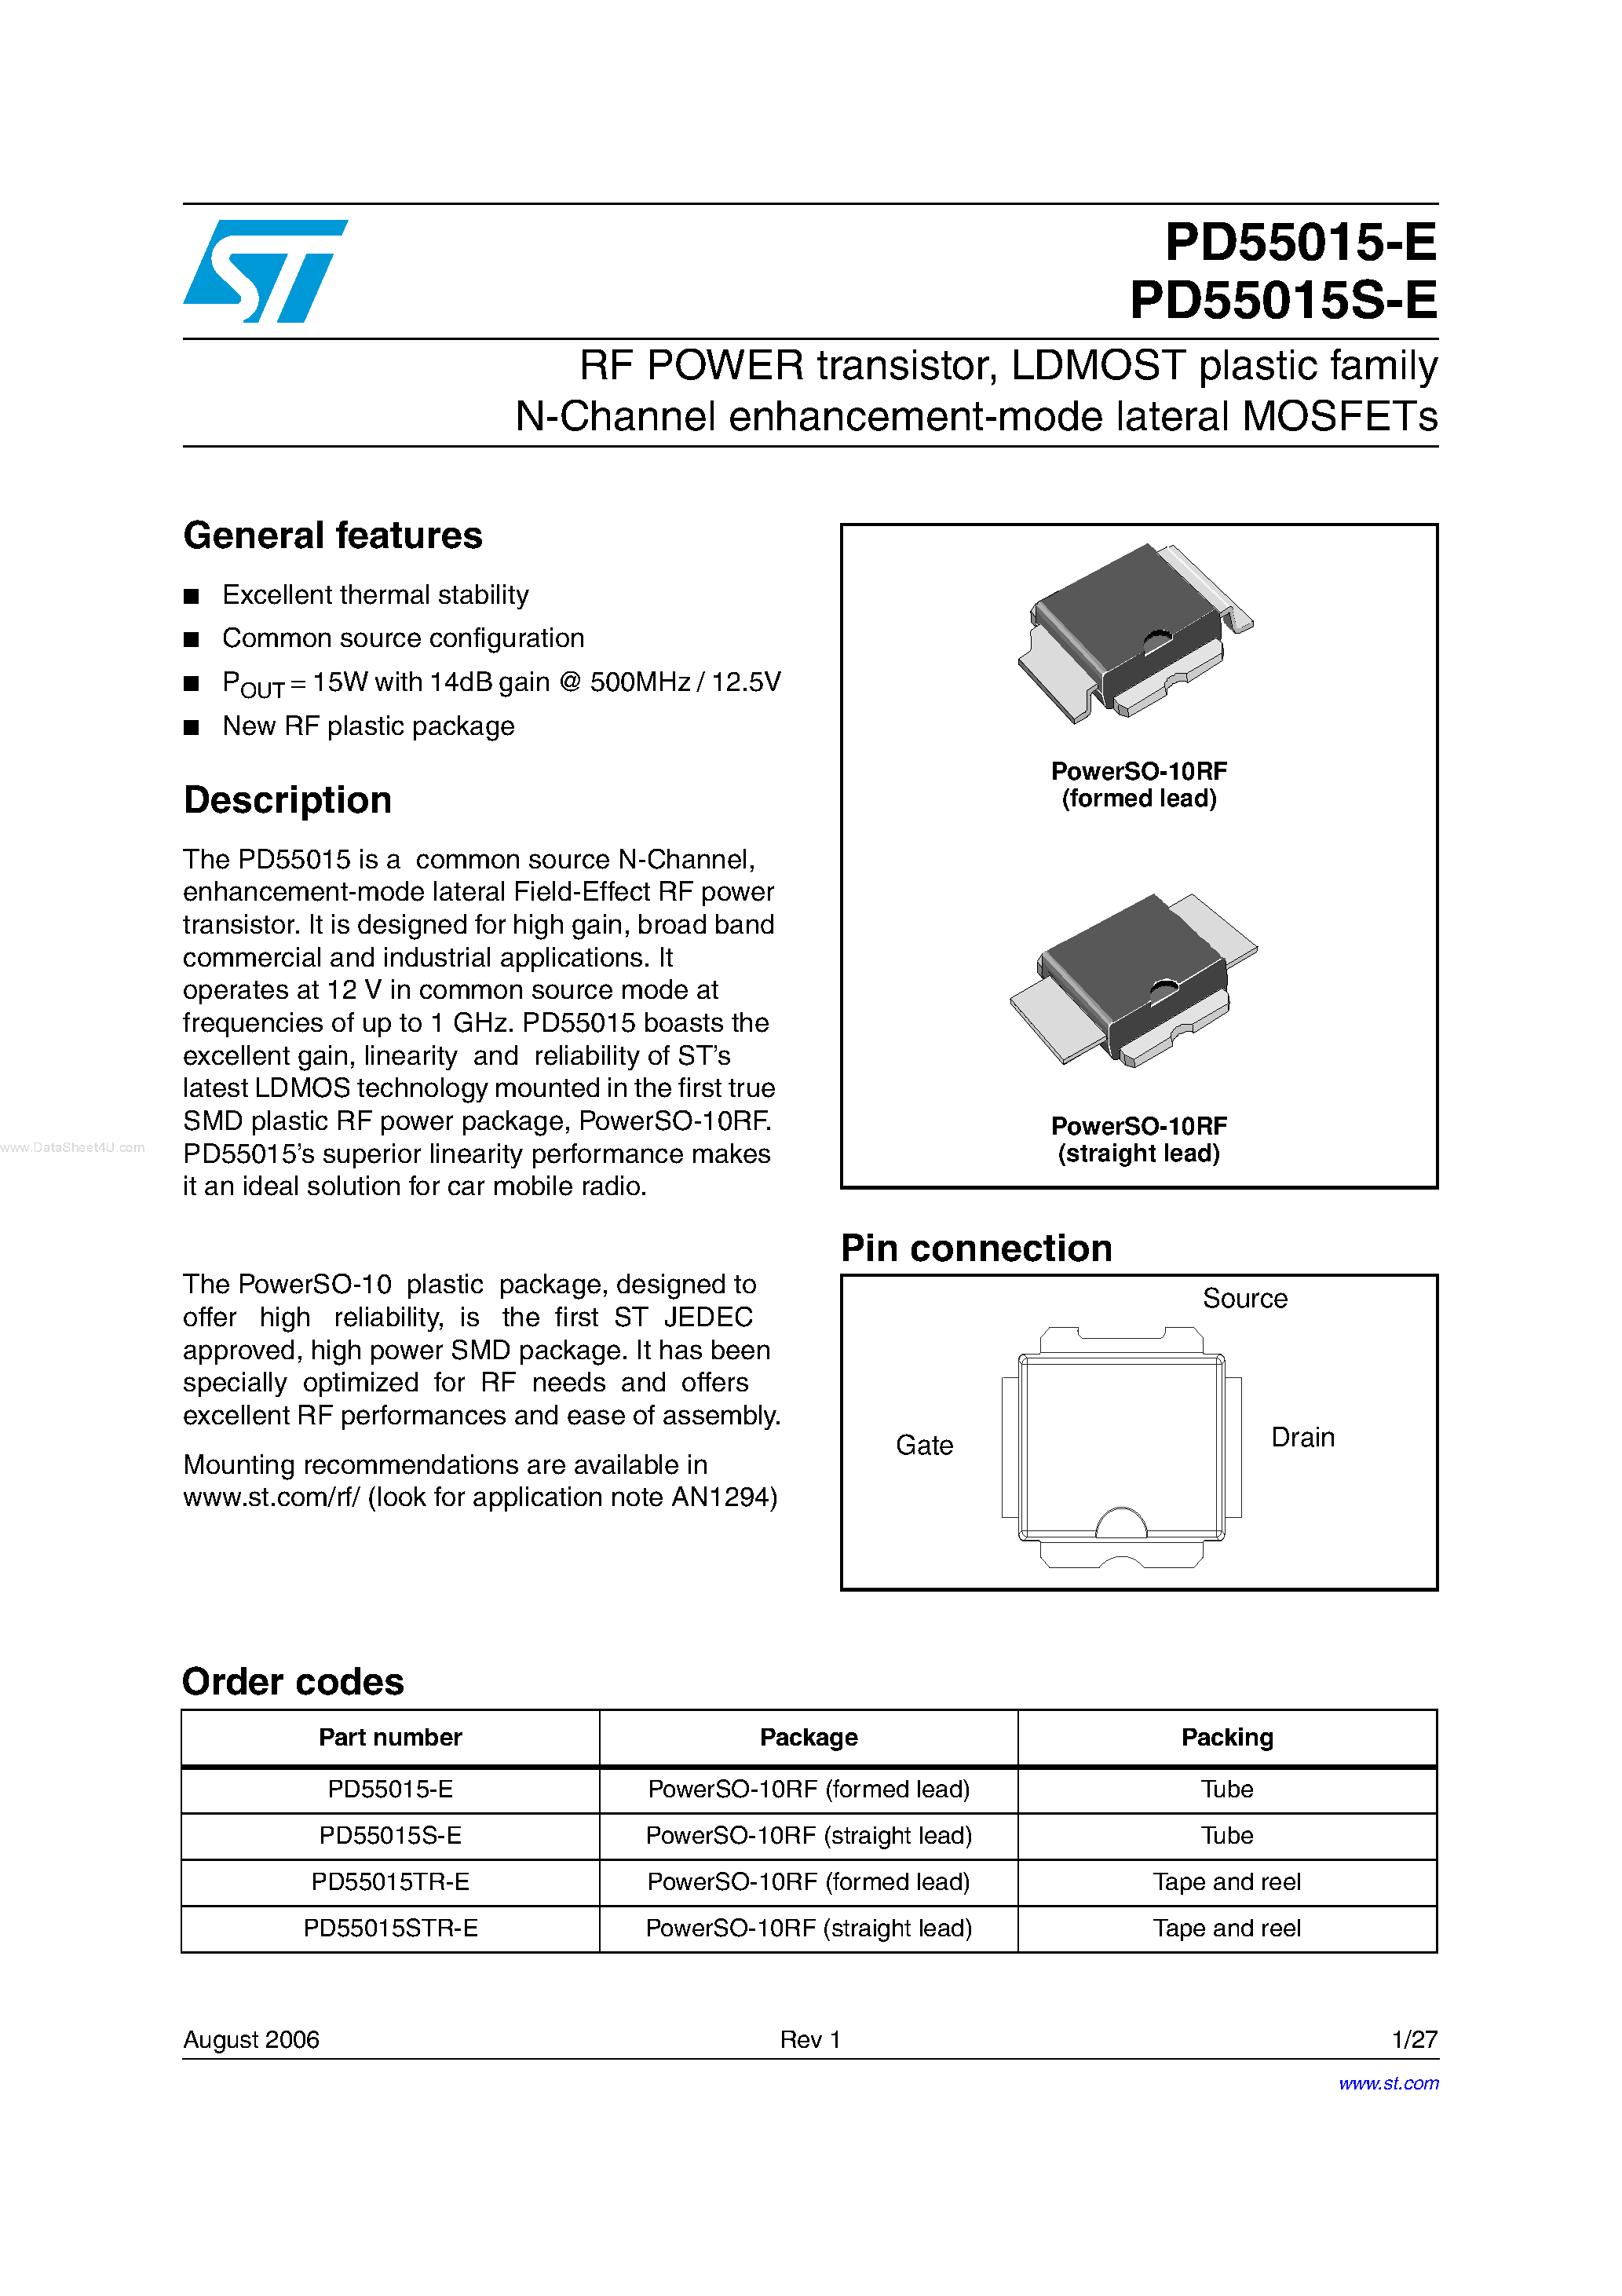 Datasheet PD55015-E - LDMOST plastic family N-Channel enhancement-mode lateral MOSFETs page 1